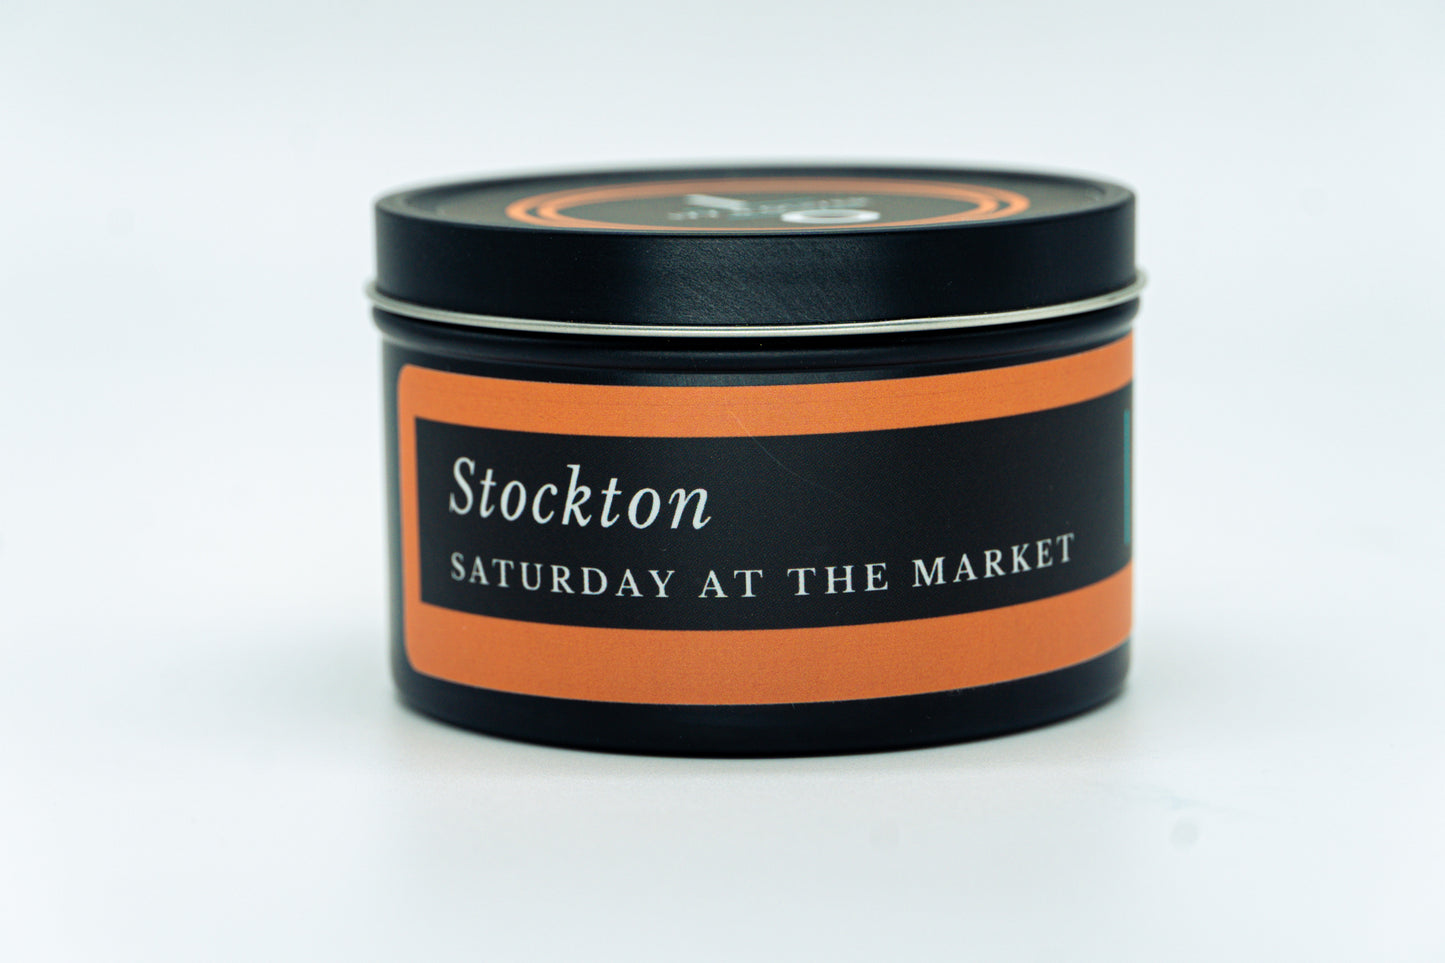 Stockton - Saturday At The Market - Wooden Wick Candle